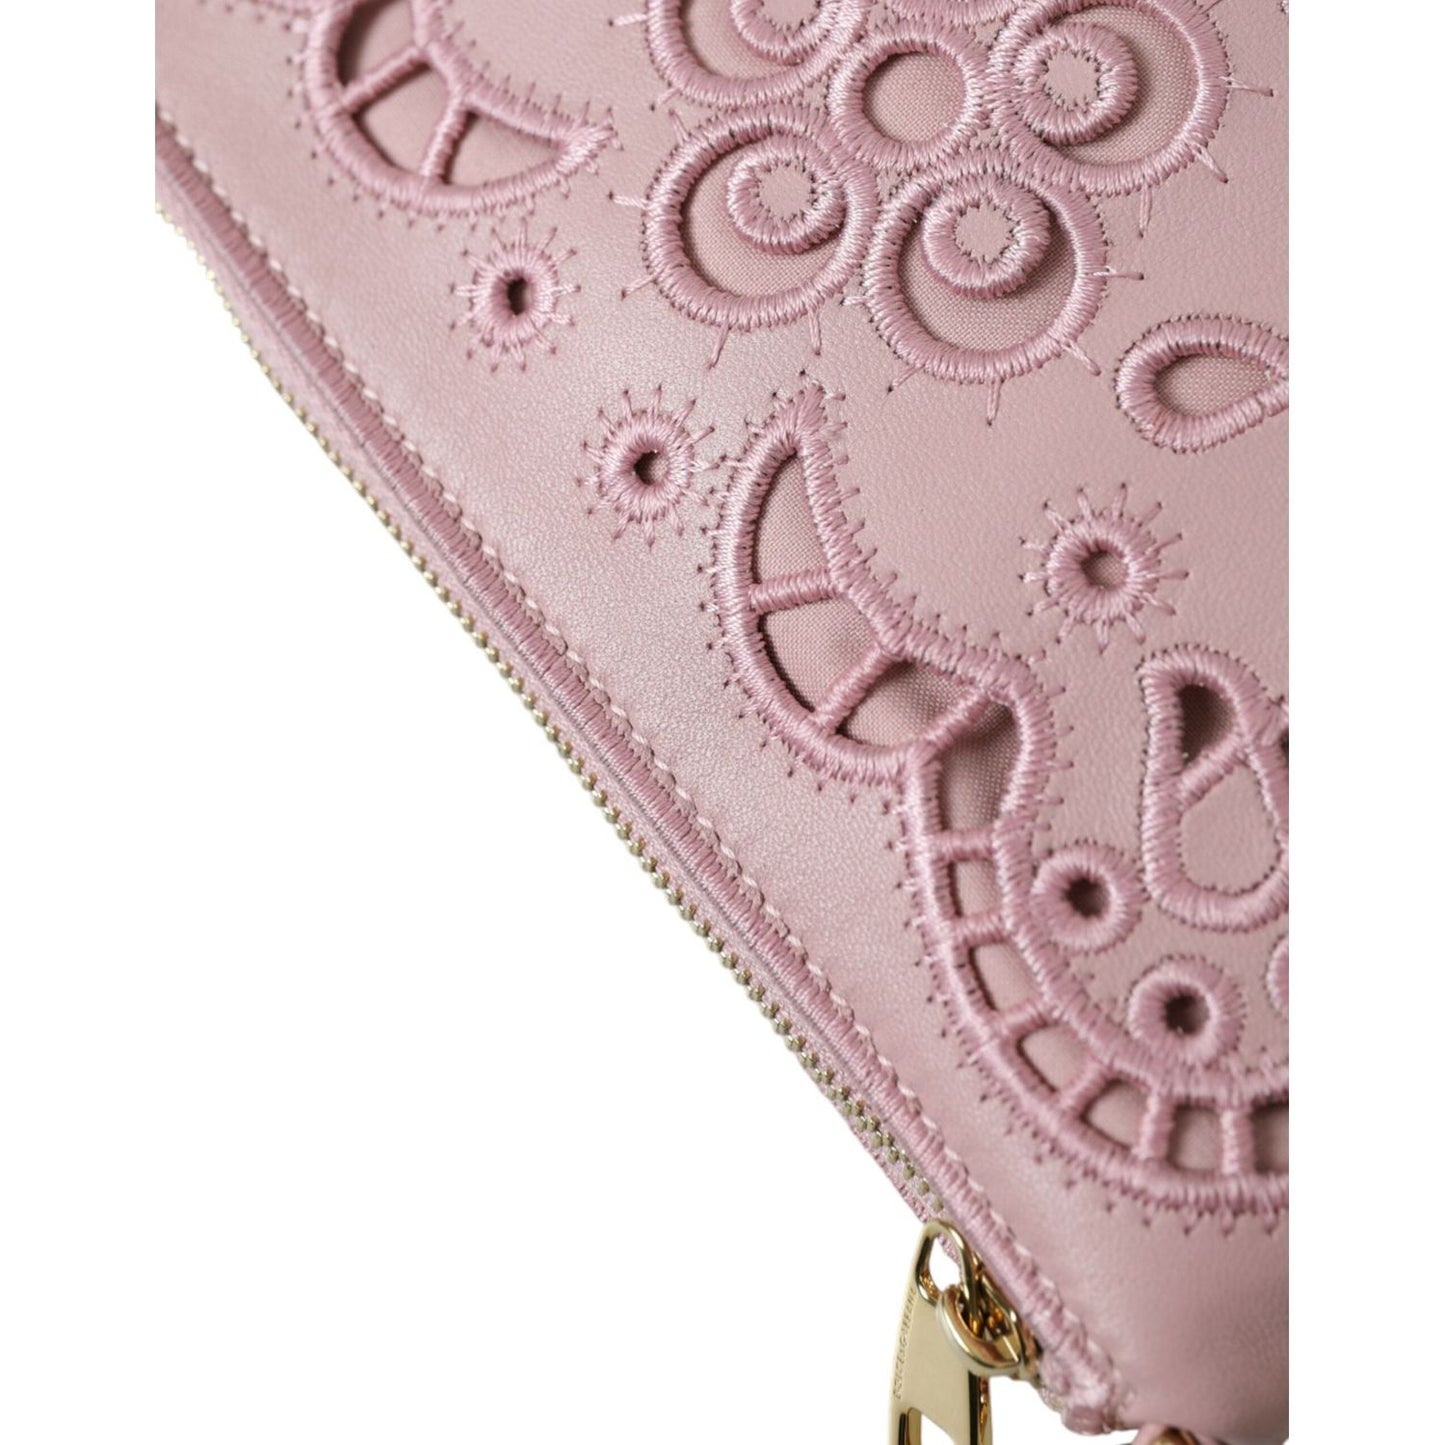 Dolce & Gabbana Elegant Pink Leather Pouch Clutch with Floral Embroidery elegant-pink-leather-pouch-clutch-with-floral-embroidery